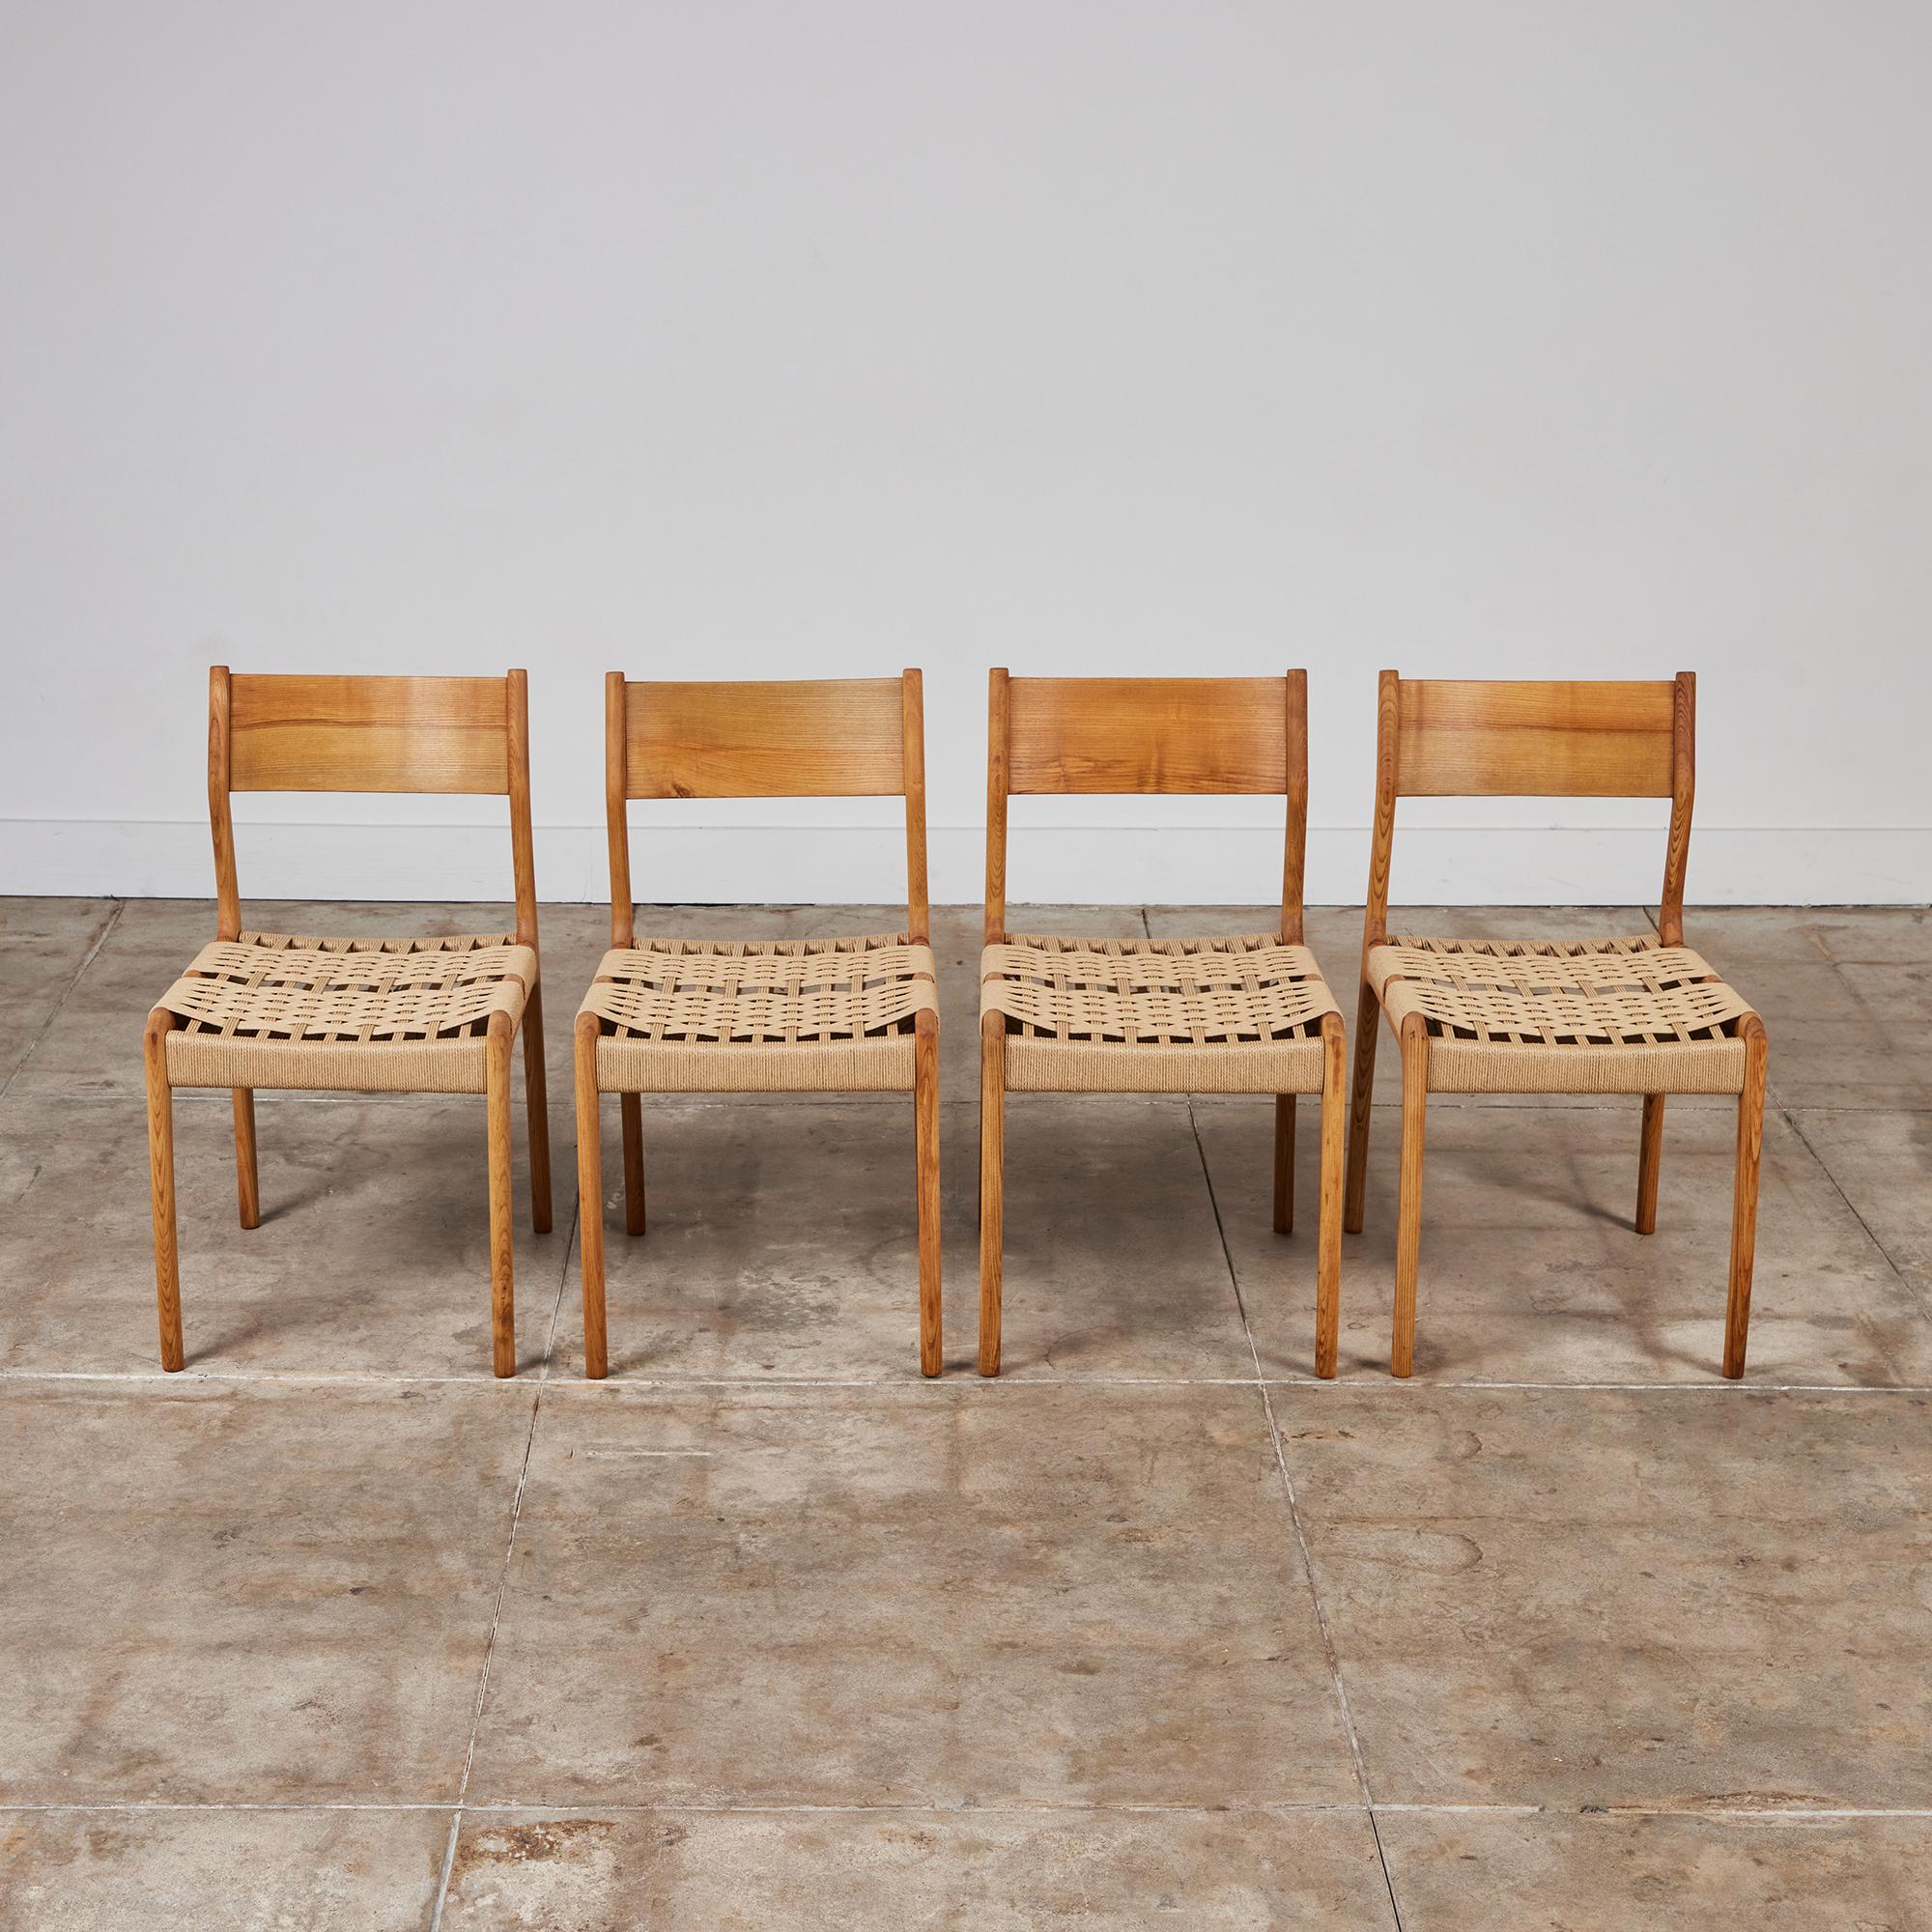 Hand-Woven Set of Four Dining Side Chairs by Consorzio Sedie Friuli